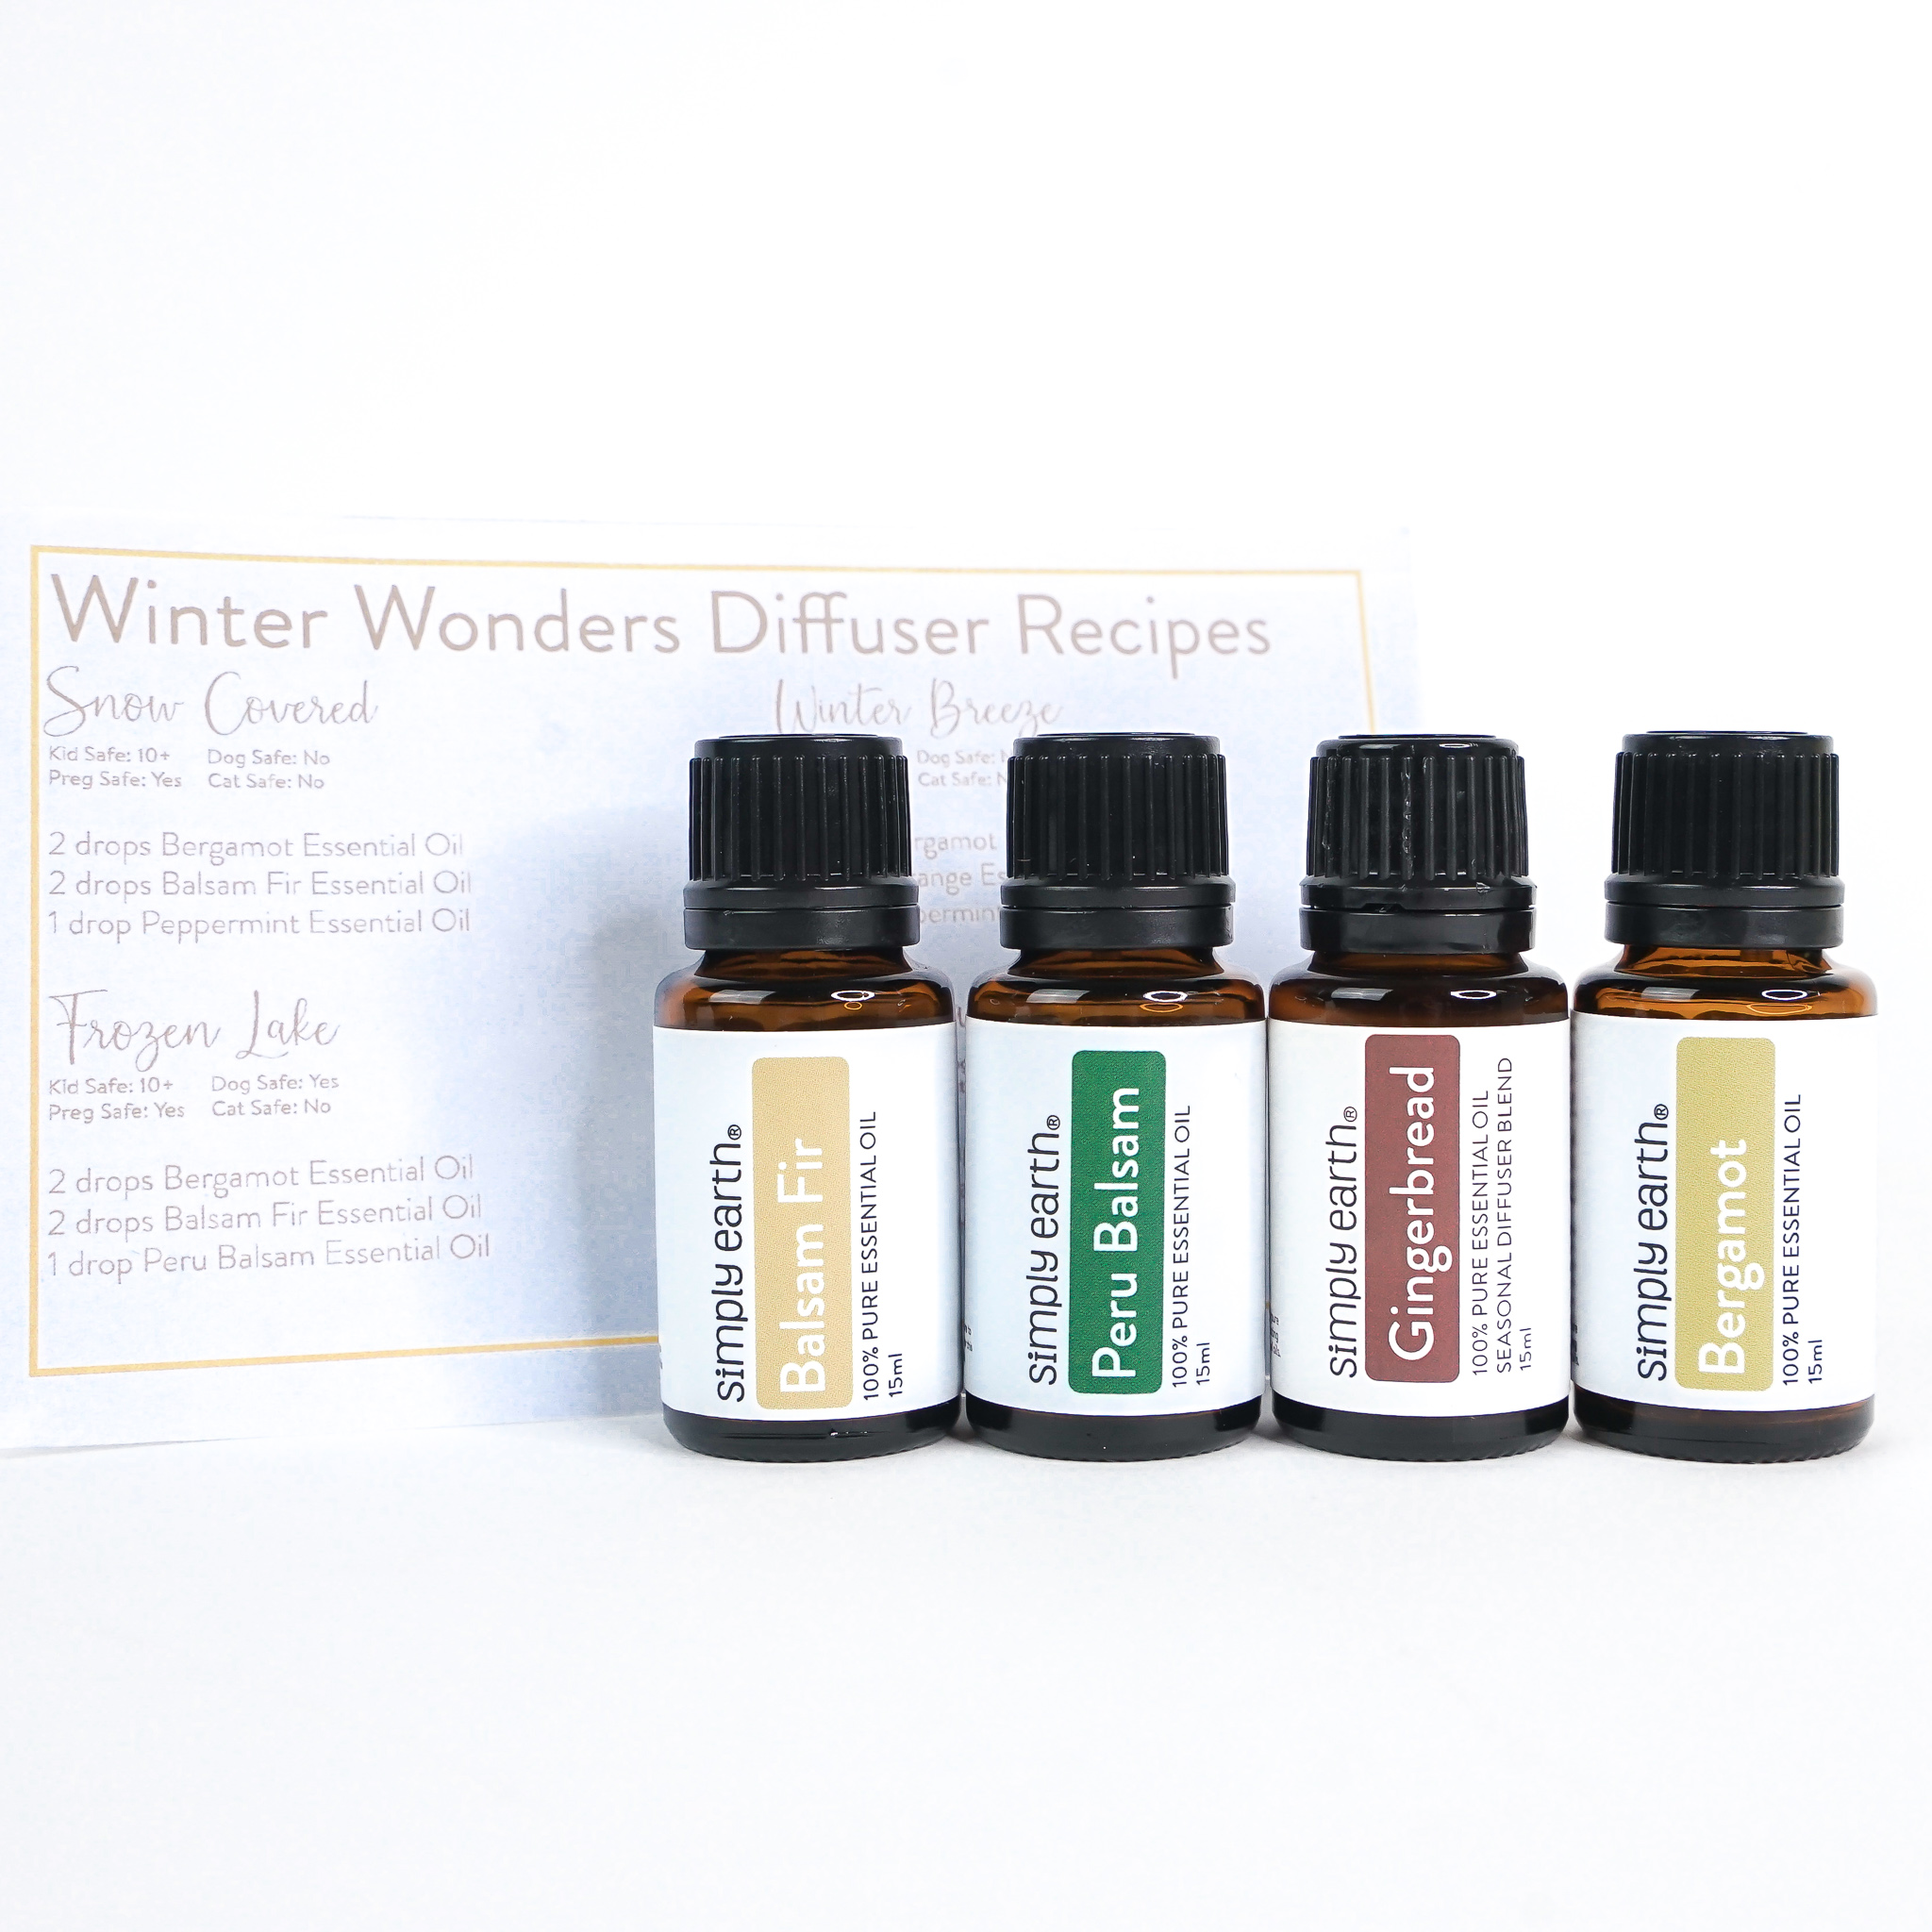 Winter Wonders Diffuser Set (4) Set:Basic (without diffuser)